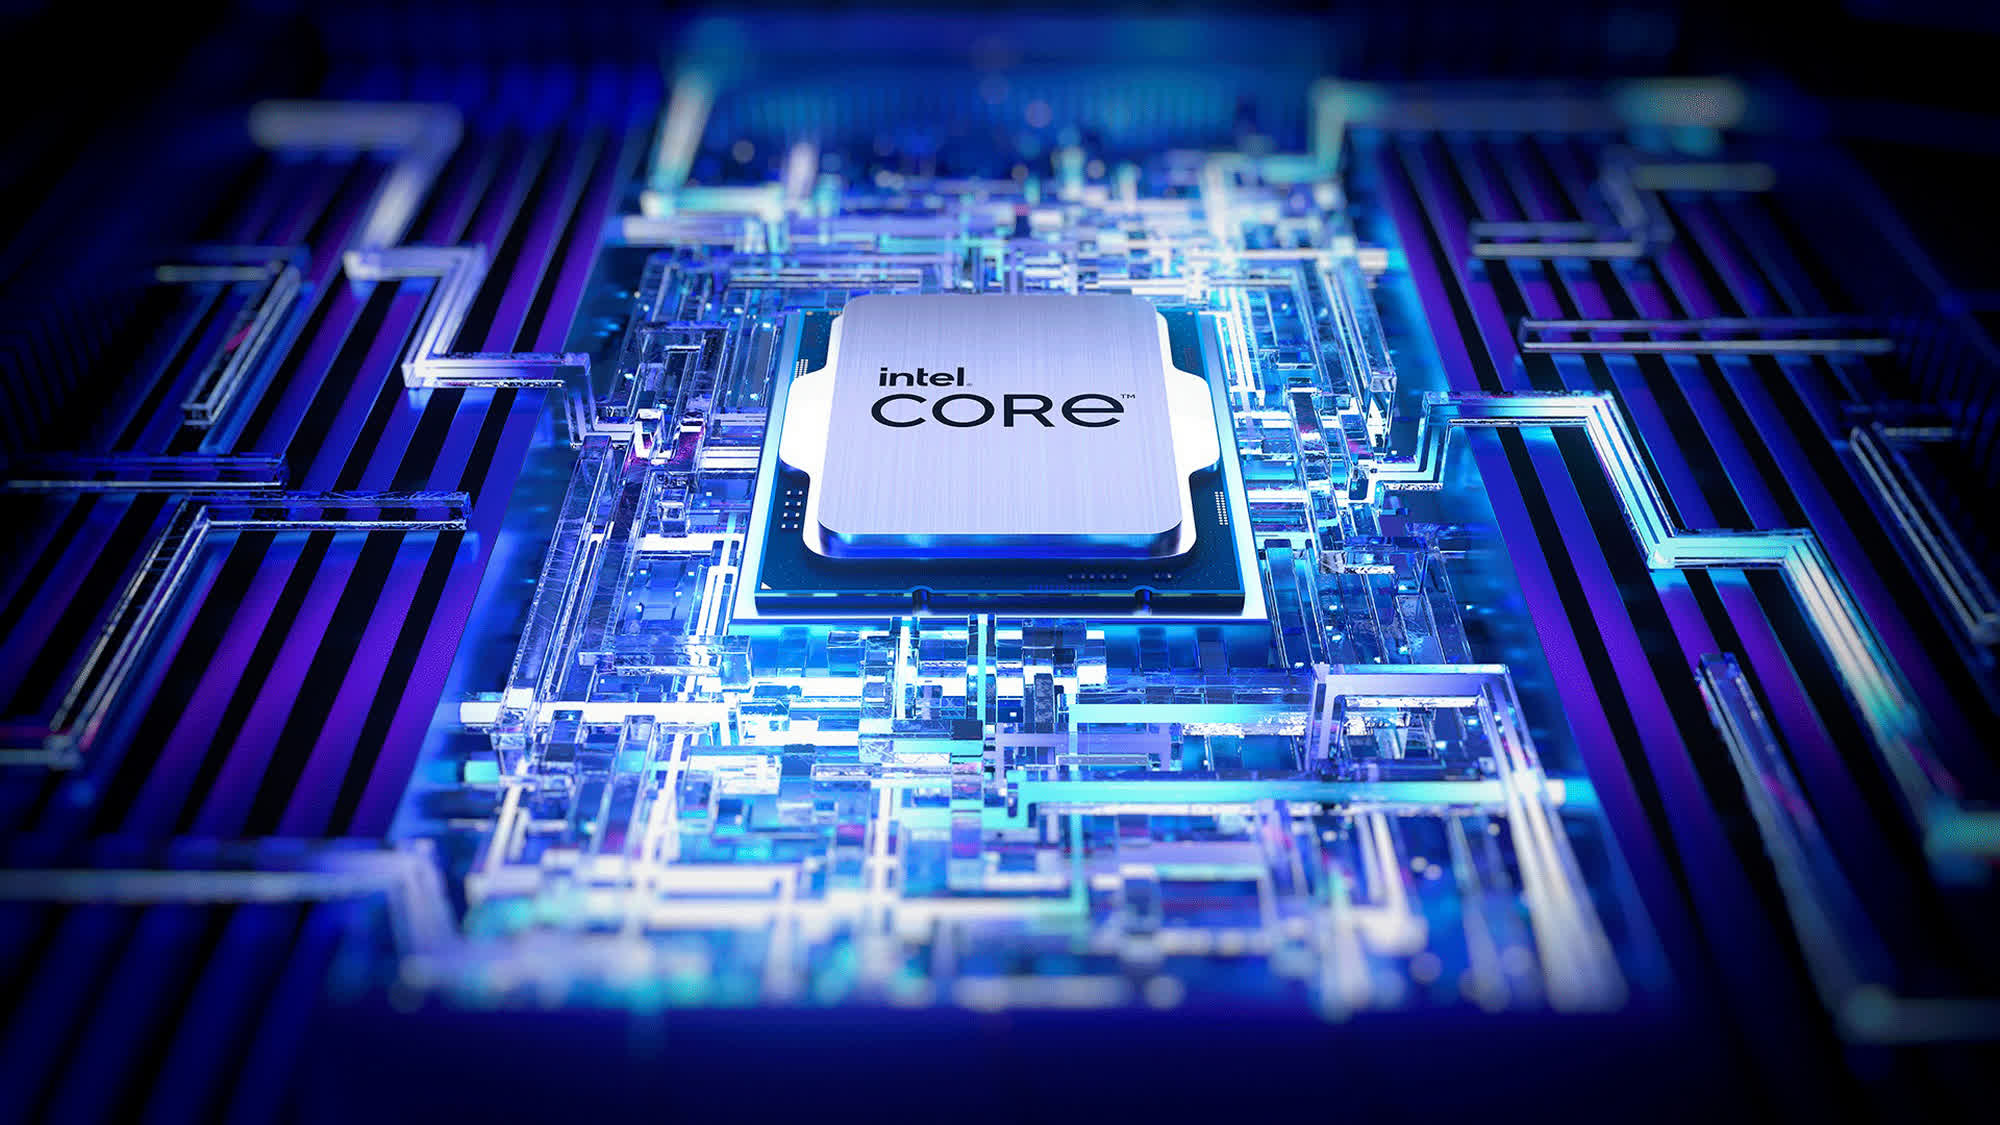 Intel could increase the price of its CPUs to help pay for fabs, restructuring